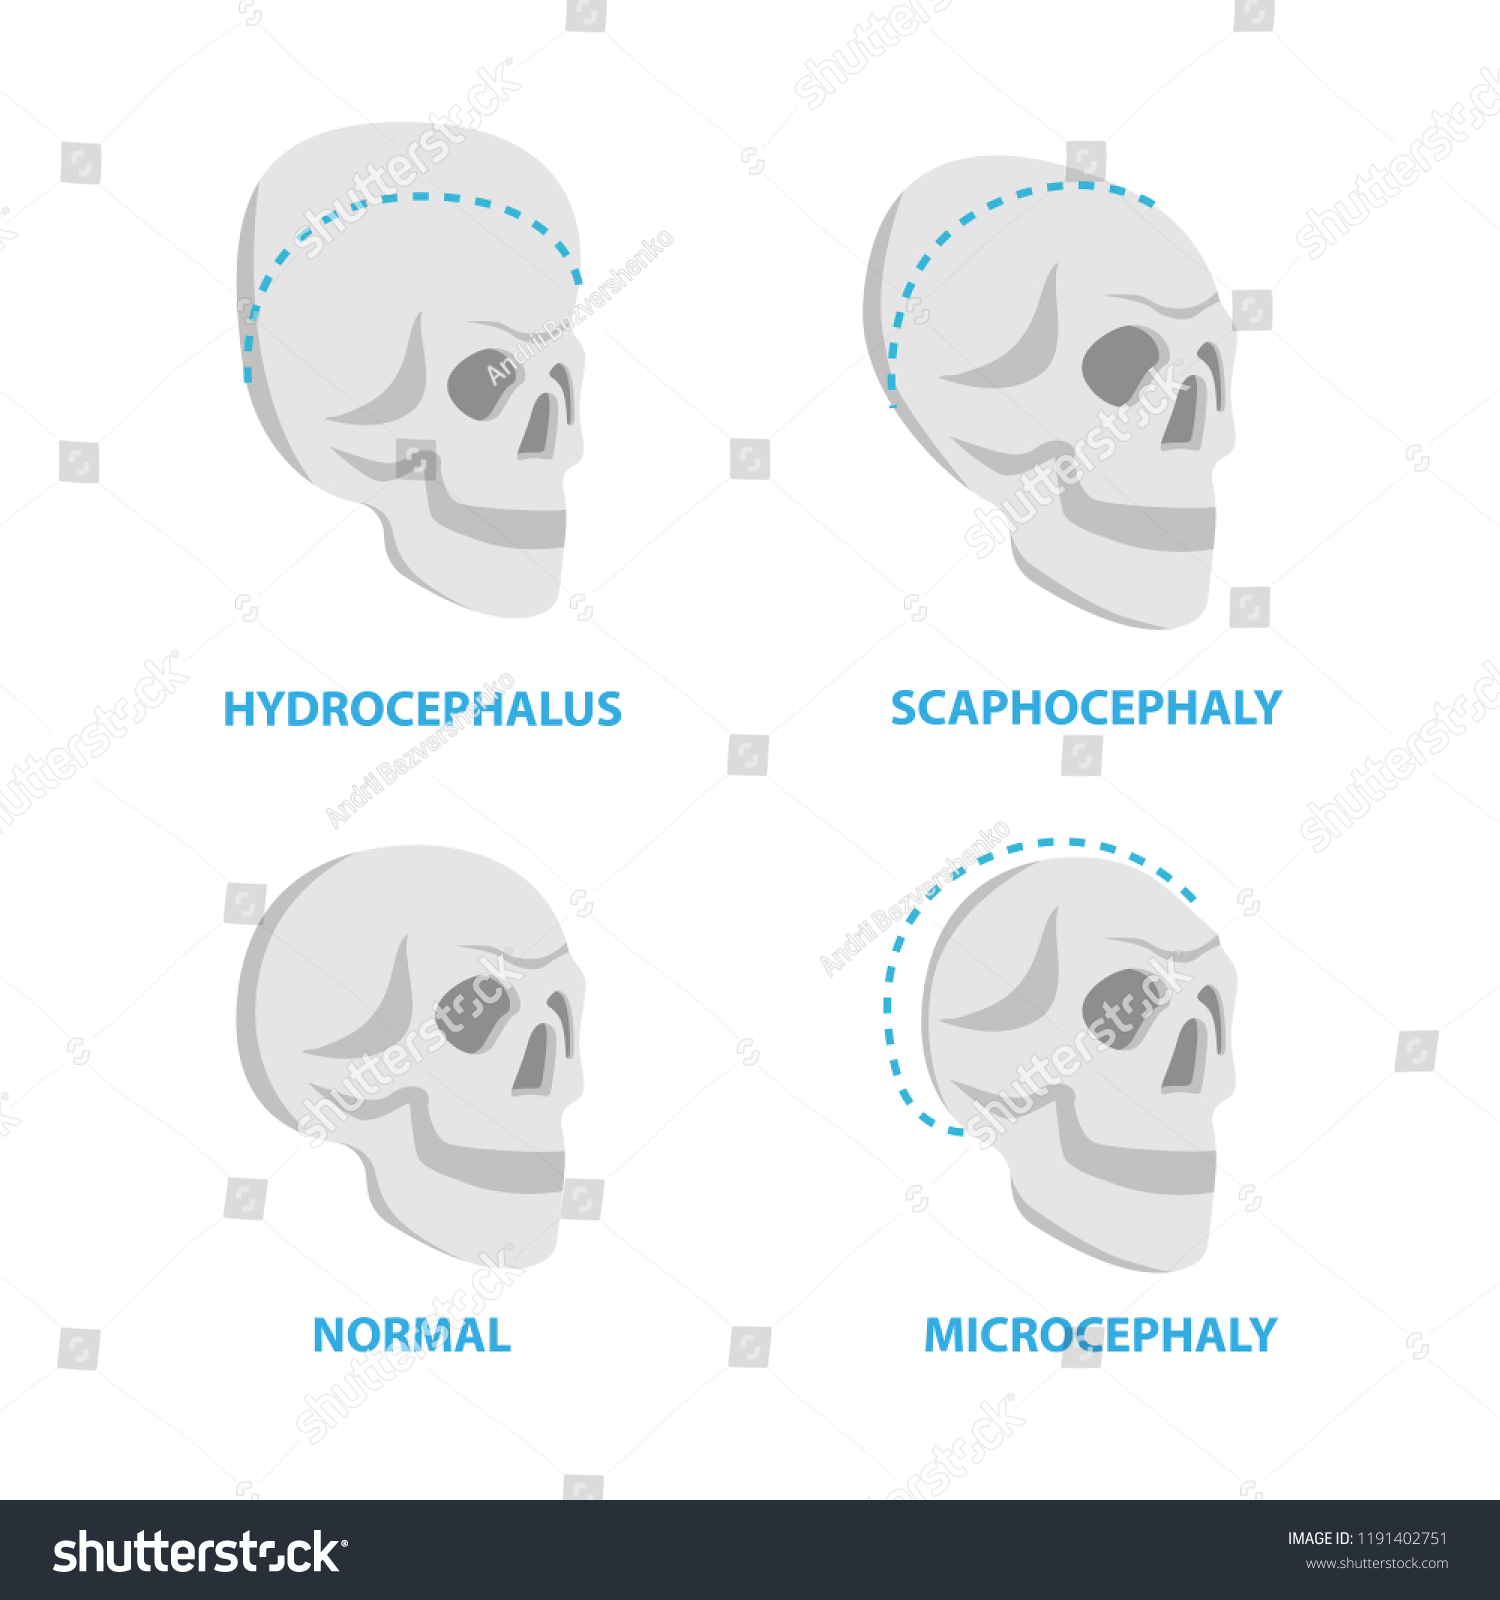 SVG of Set of Skulls normal and deformed,  hydrocephalus, scaphocephaly, microcephaly vector flat icons, skull medical illustrations, anatomical infographic elements isolated on white background. svg